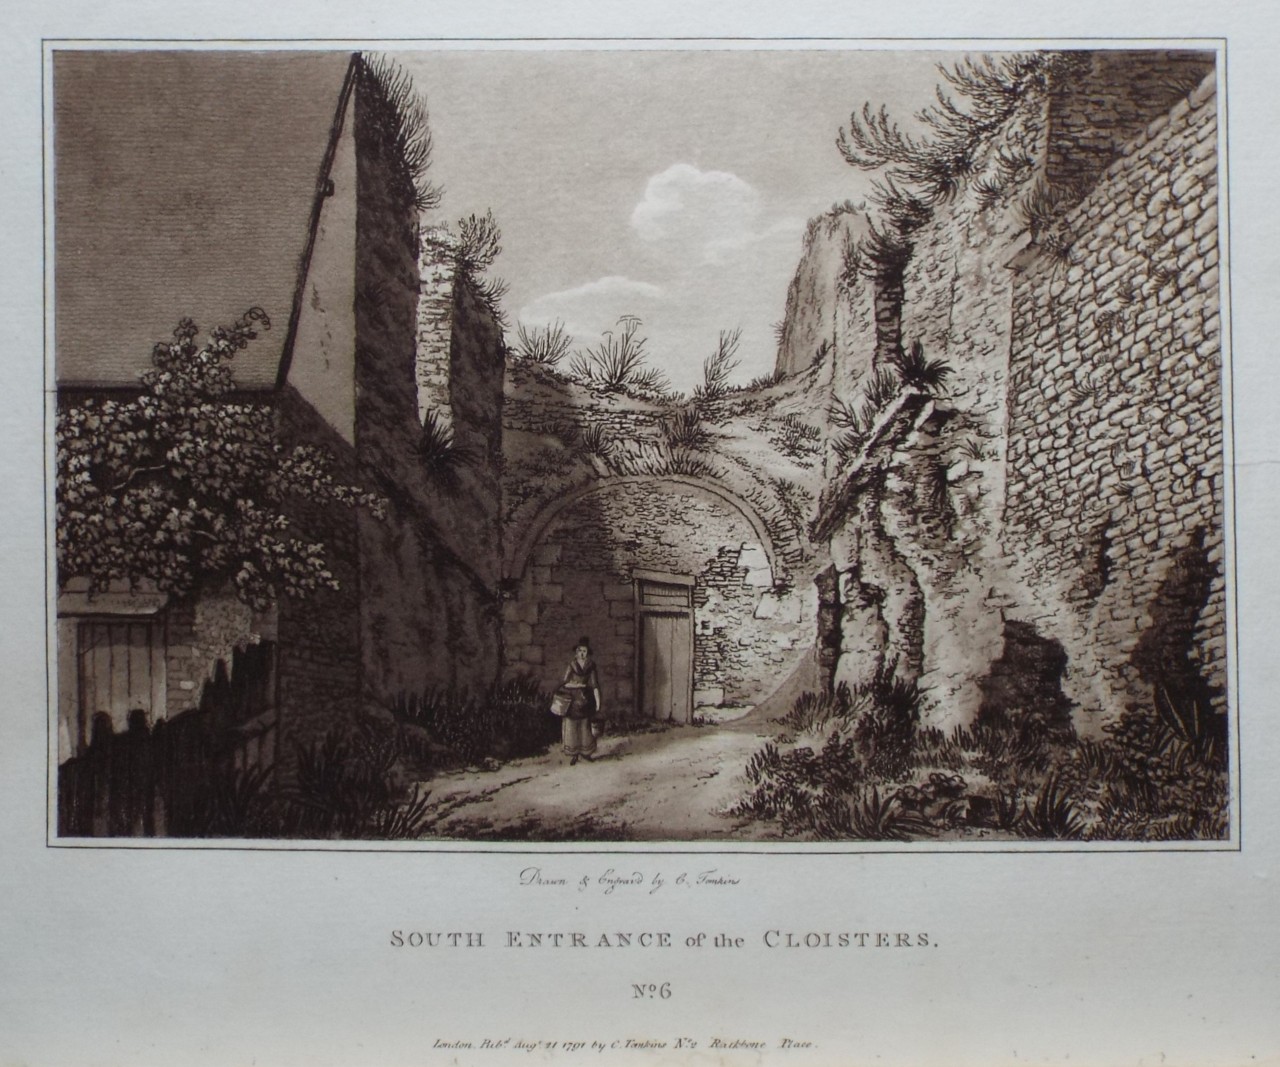 Aquatint - South Entrance of the Cloisters. - Tomkins